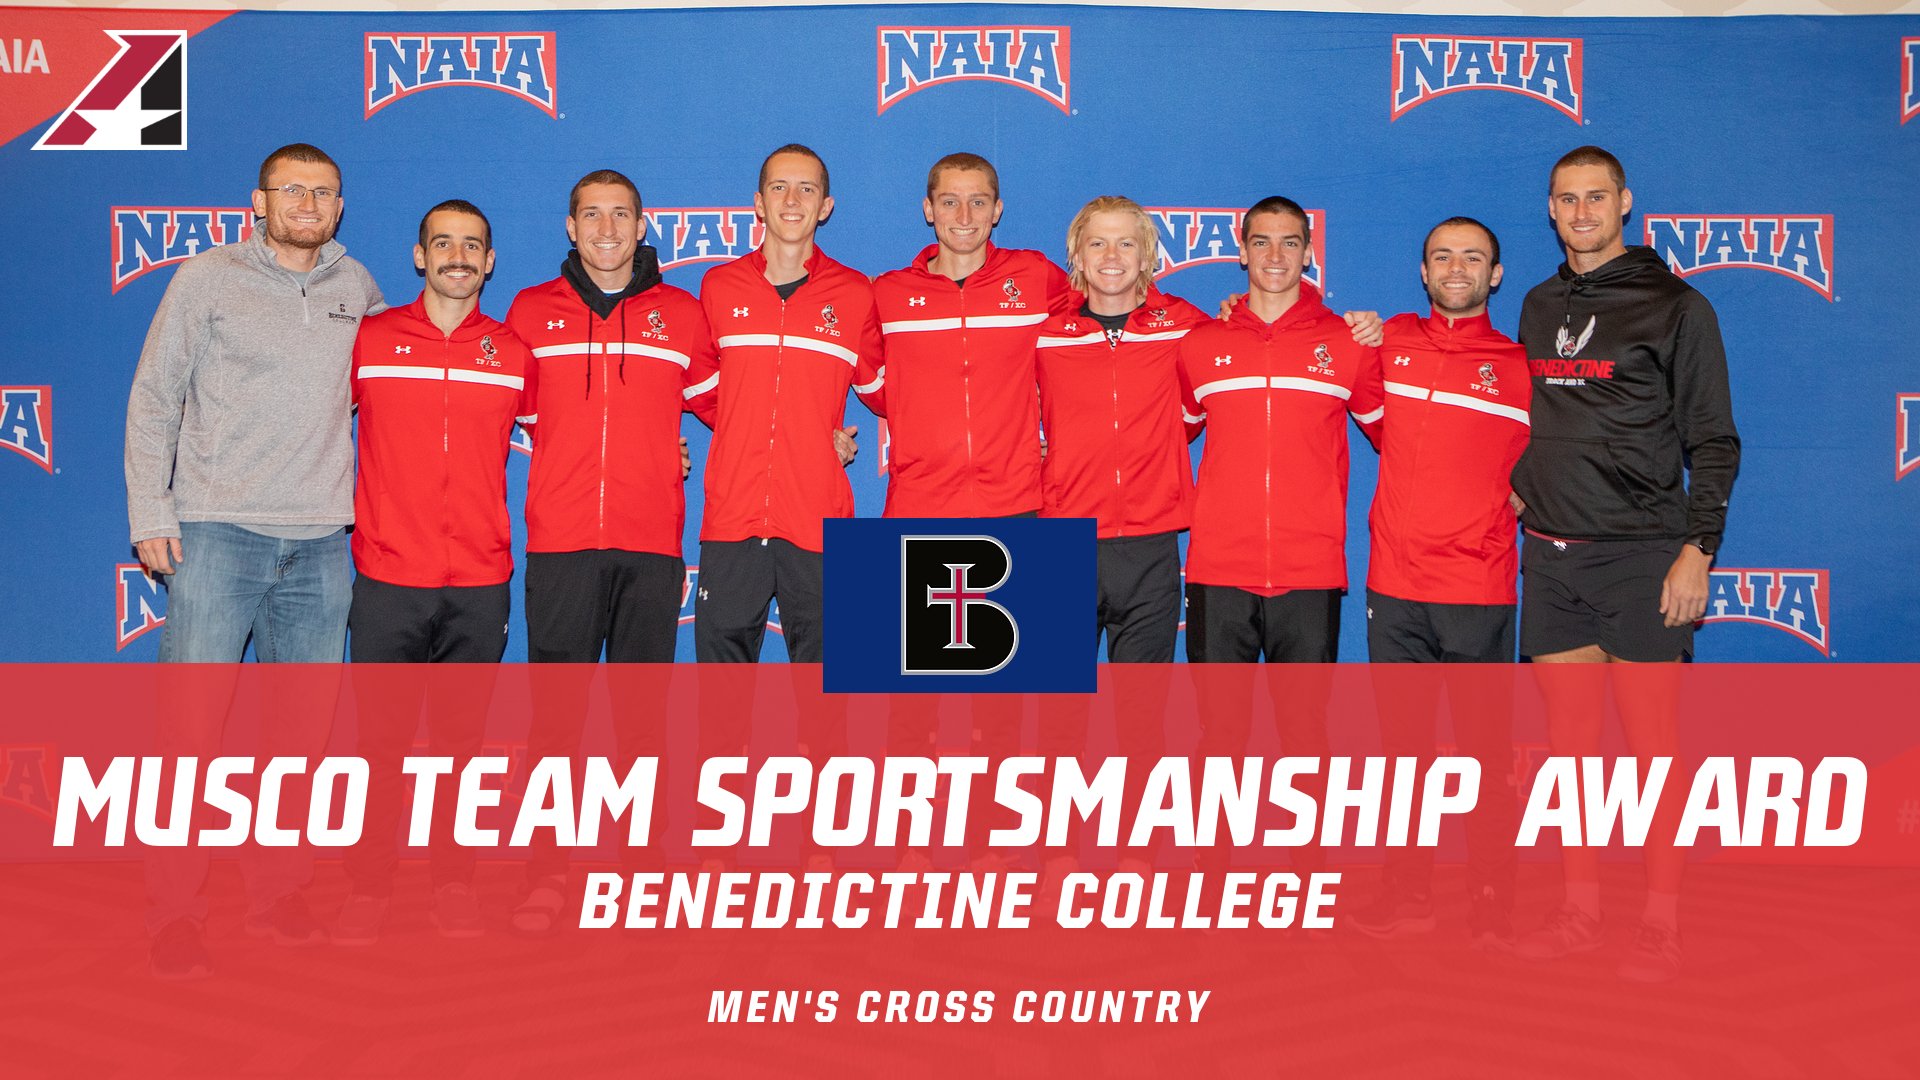 Benedictine College Men&rsquo;s Cross Country Selected for Musco Team Sportsmanship Award